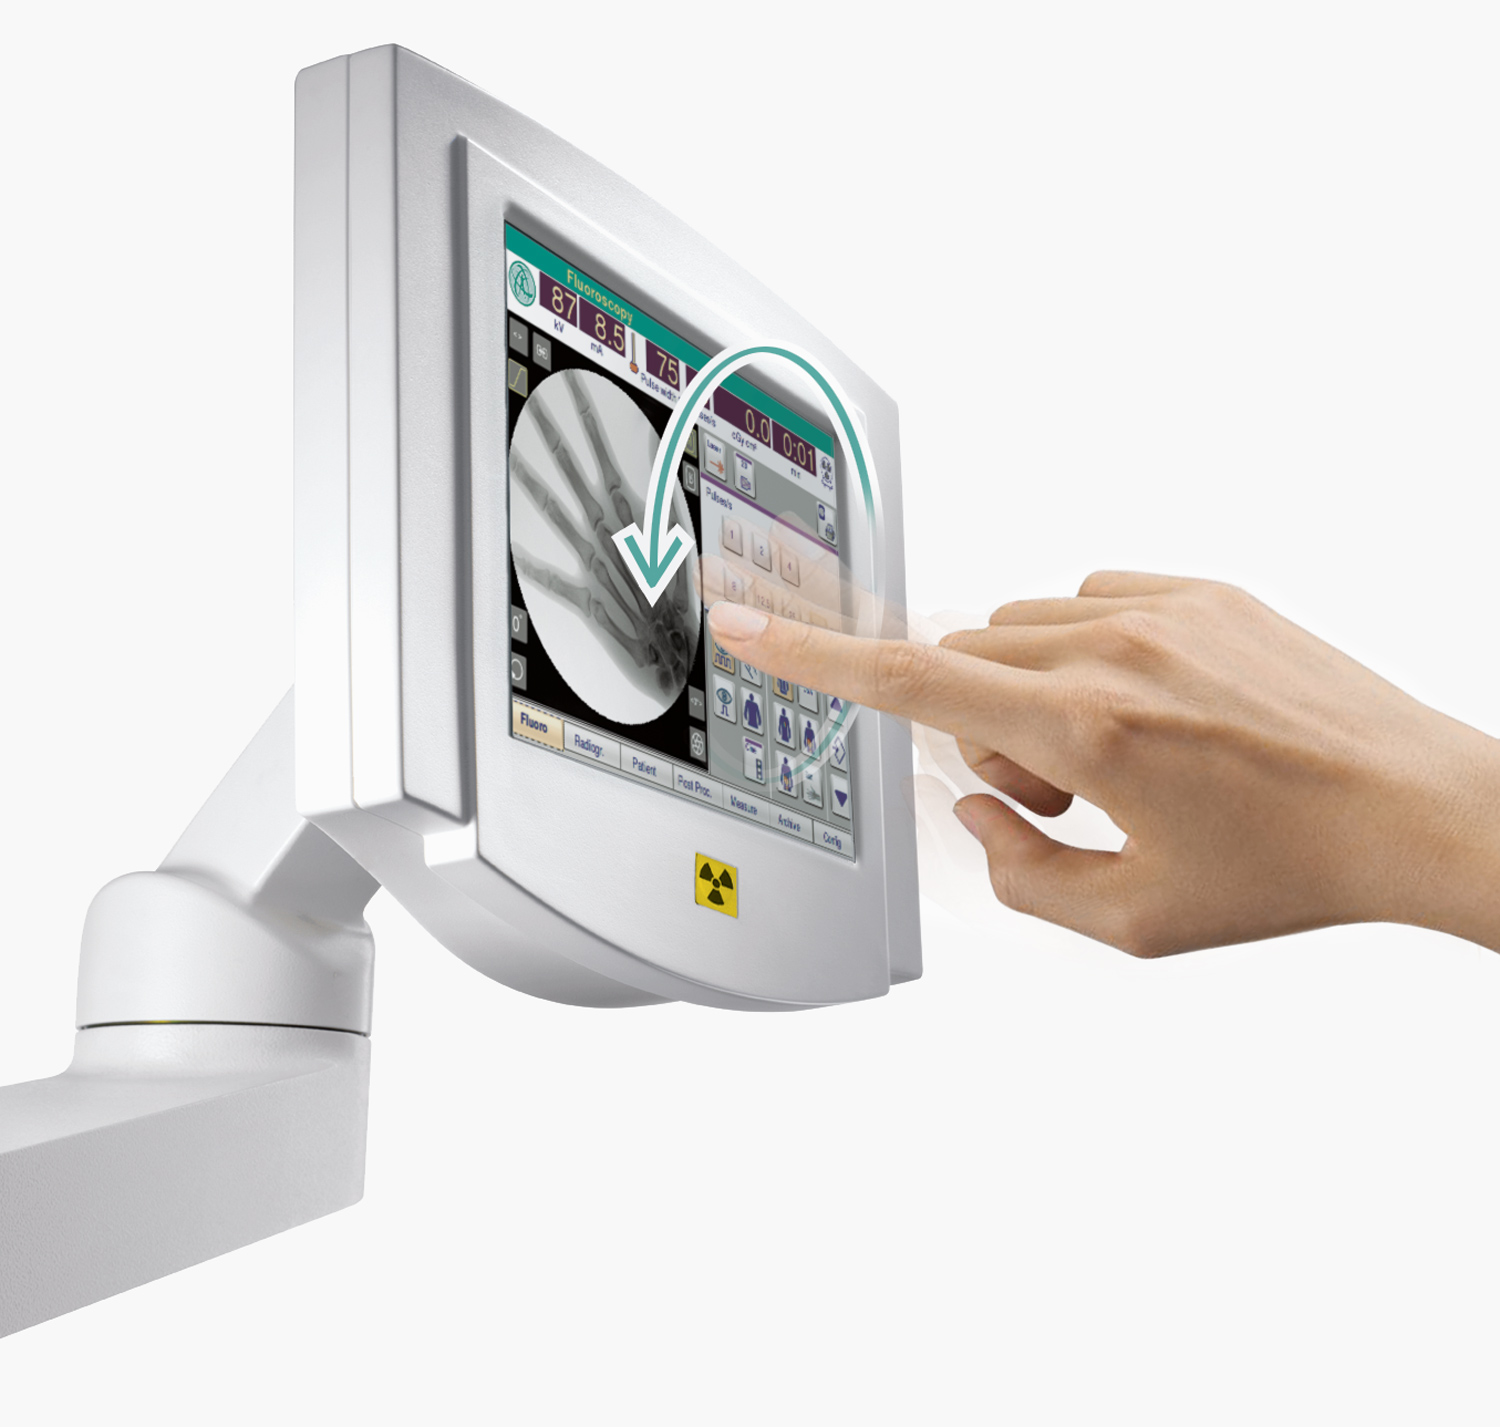 Finger swiping on Ziehm mobile c-arm touchscreen interface.